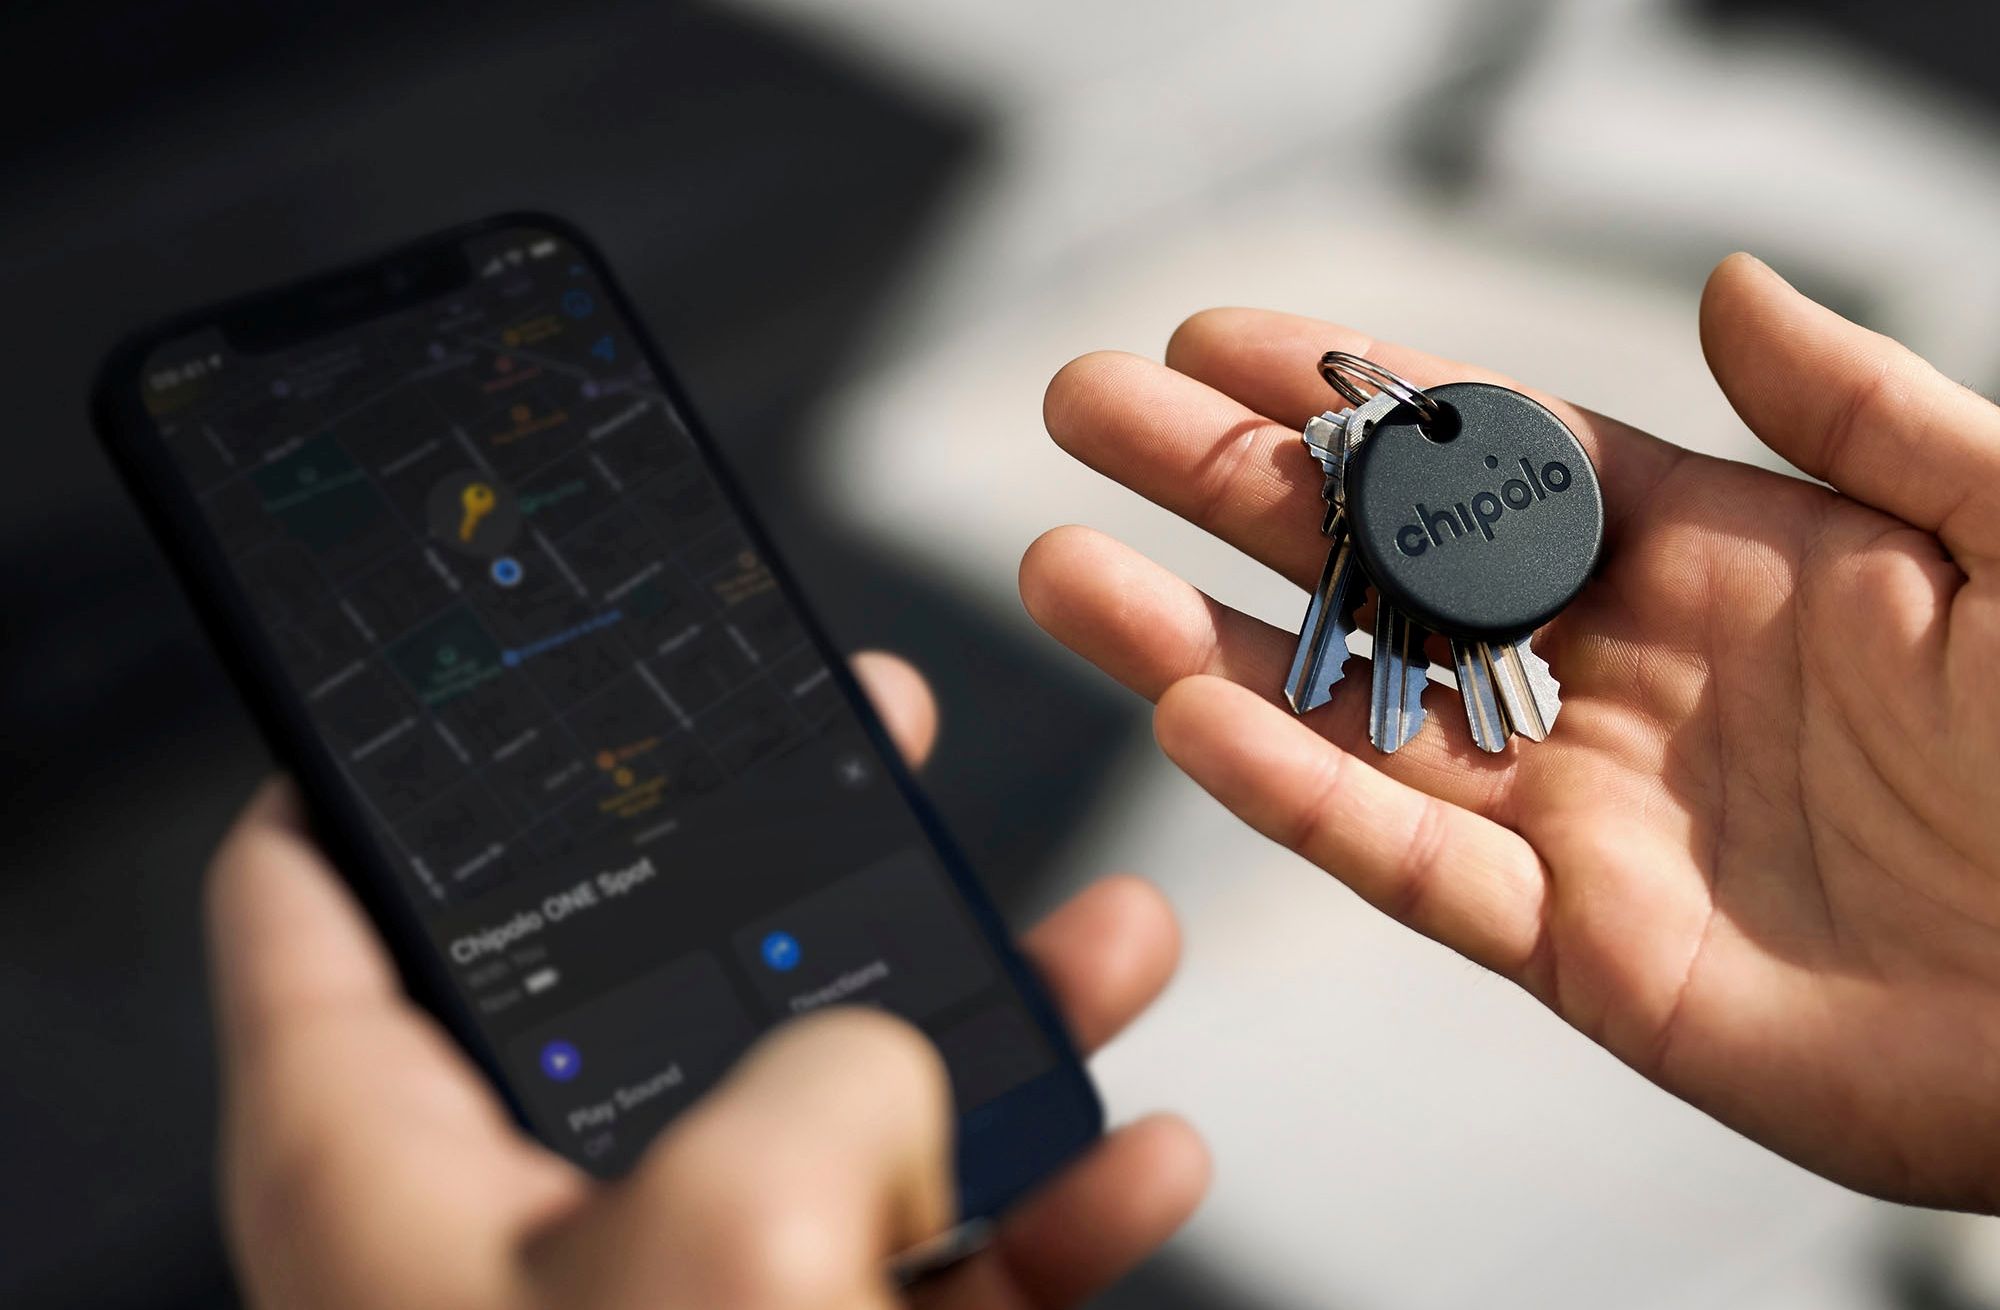 person holding a Chipolo one smart tag attached to keys and a smartphone